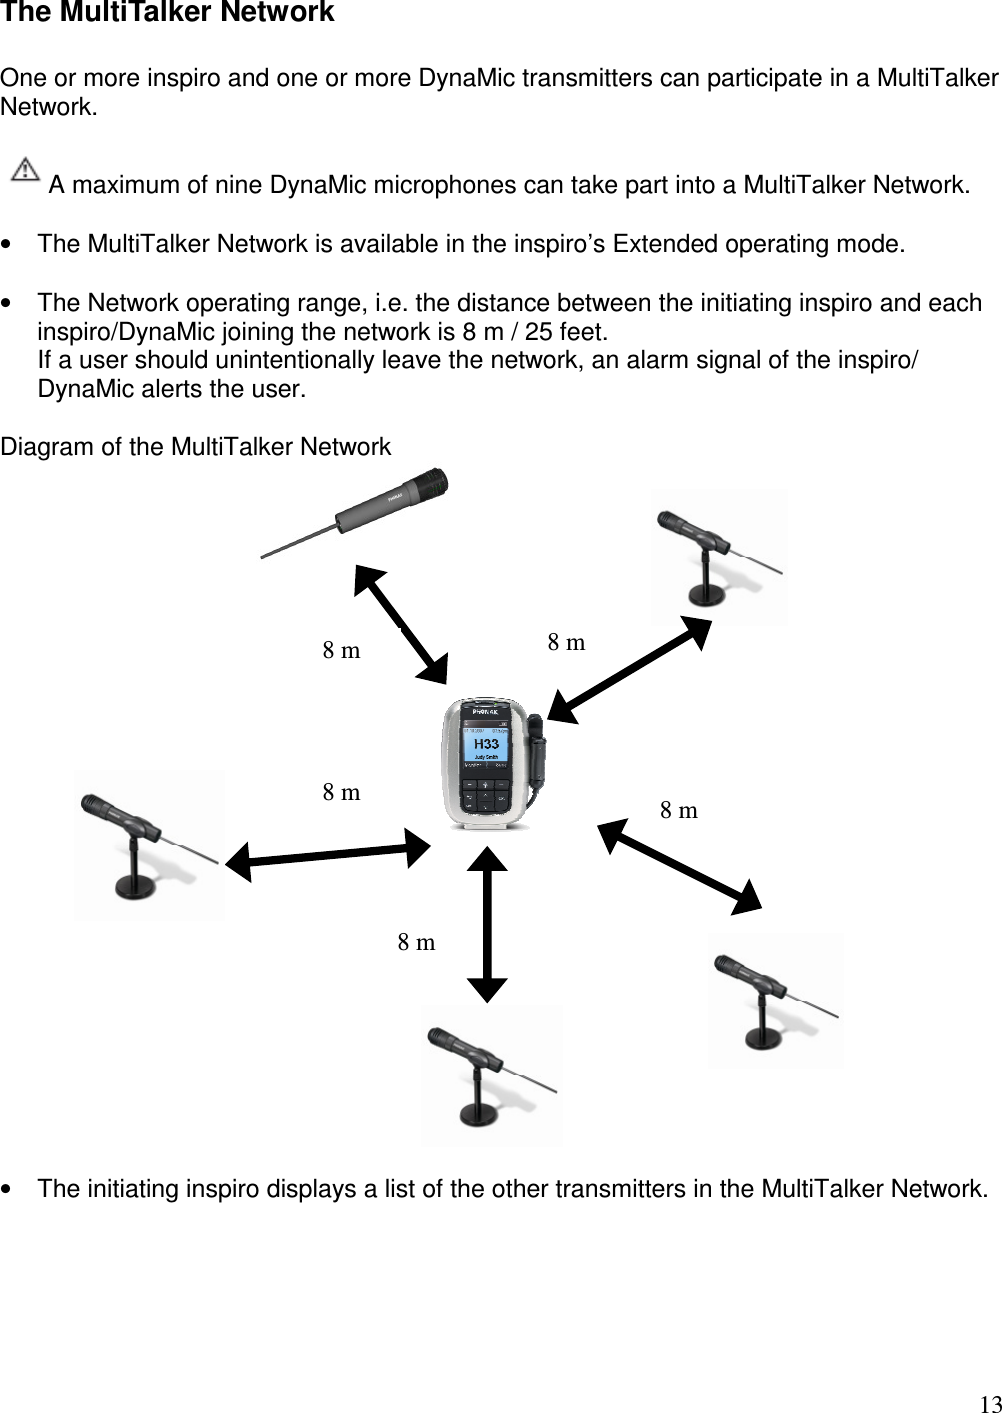   13 The MultiTalker Network  One or more inspiro and one or more DynaMic transmitters can participate in a MultiTalker Network.    A maximum of nine DynaMic microphones can take part into a MultiTalker Network.  •  The MultiTalker Network is available in the inspiro’s Extended operating mode.  •  The Network operating range, i.e. the distance between the initiating inspiro and each inspiro/DynaMic joining the network is 8 m / 25 feet.  If a user should unintentionally leave the network, an alarm signal of the inspiro/ DynaMic alerts the user.  Diagram of the MultiTalker Network    •  The initiating inspiro displays a list of the other transmitters in the MultiTalker Network.   8 m 8 m 8 m 8 m 8 m 